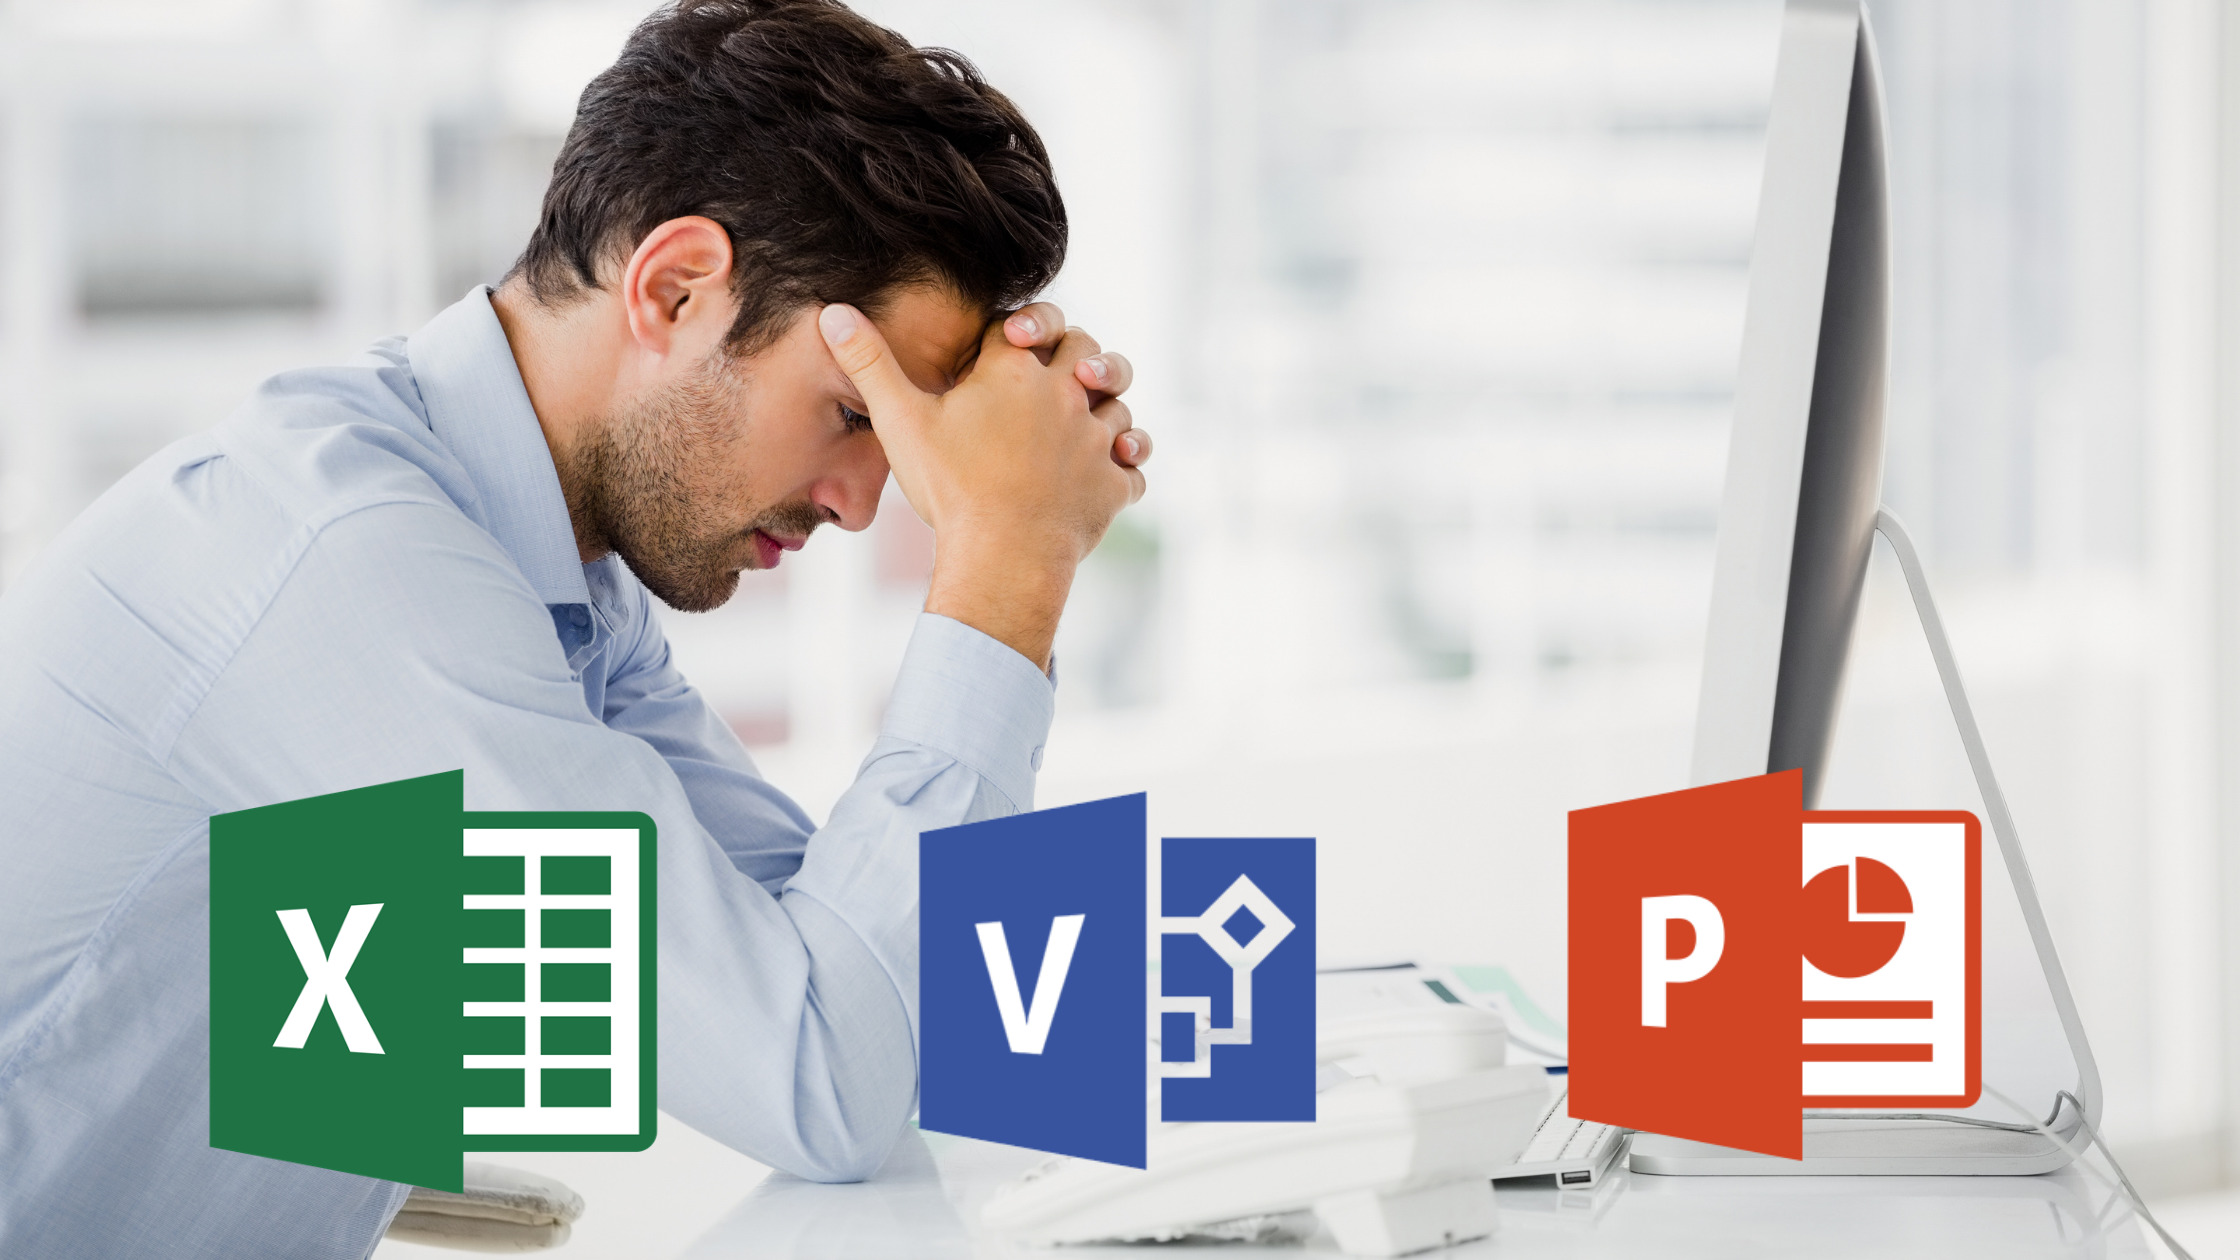 Enterprise Architecture with Excel, Visio and Powerpoint – The Recipe for Zero Business Value – Webinar